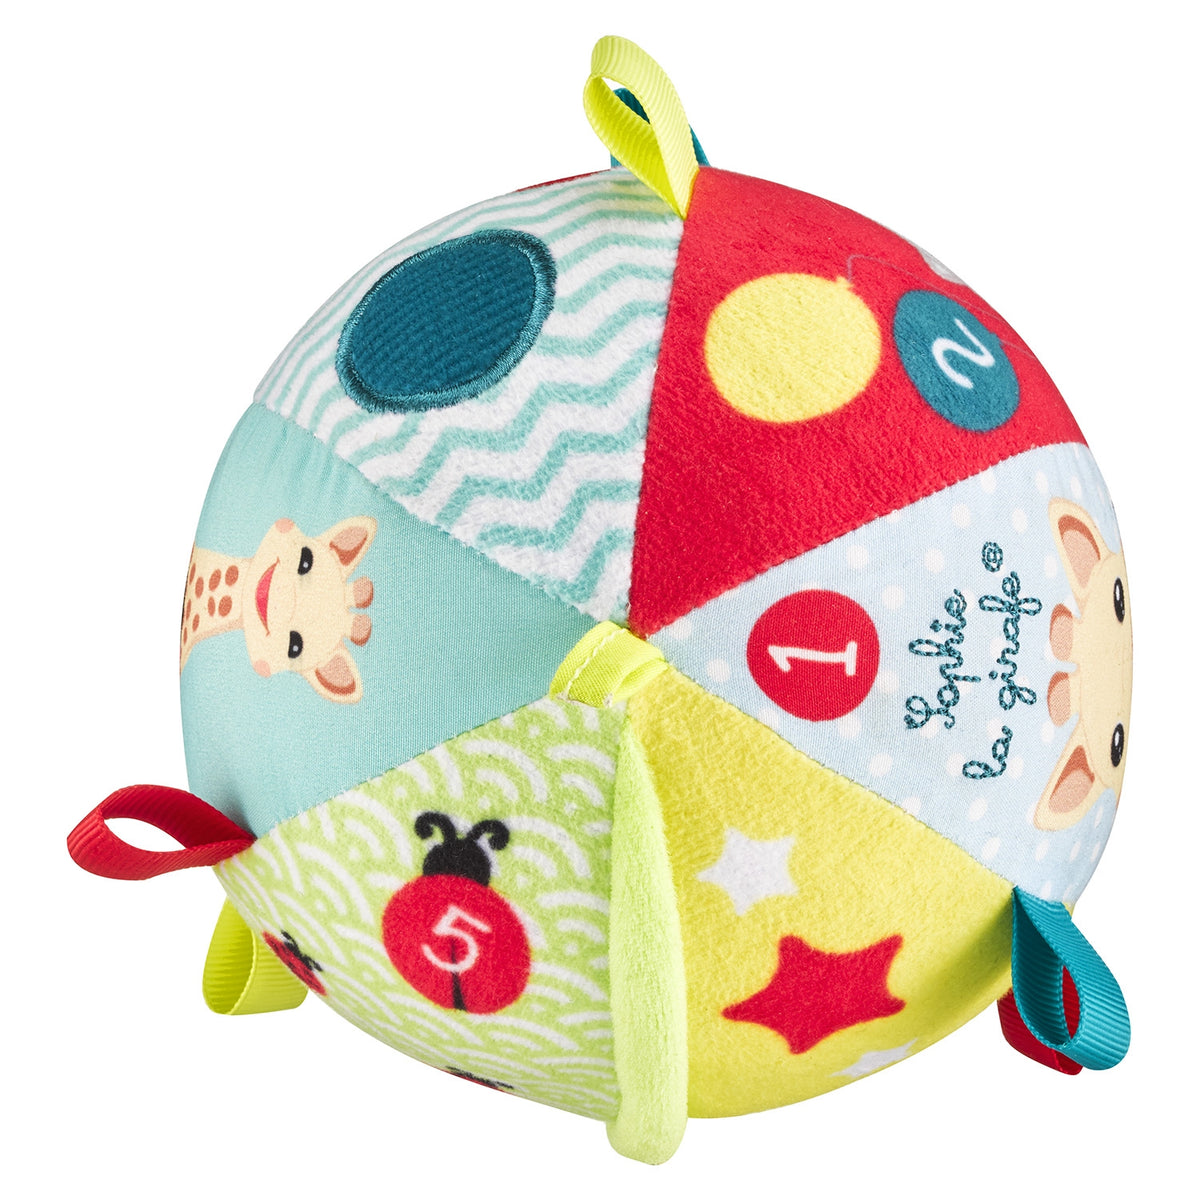 Fresh Touch: My First Early - Learning Ball by Sophie la Girafe